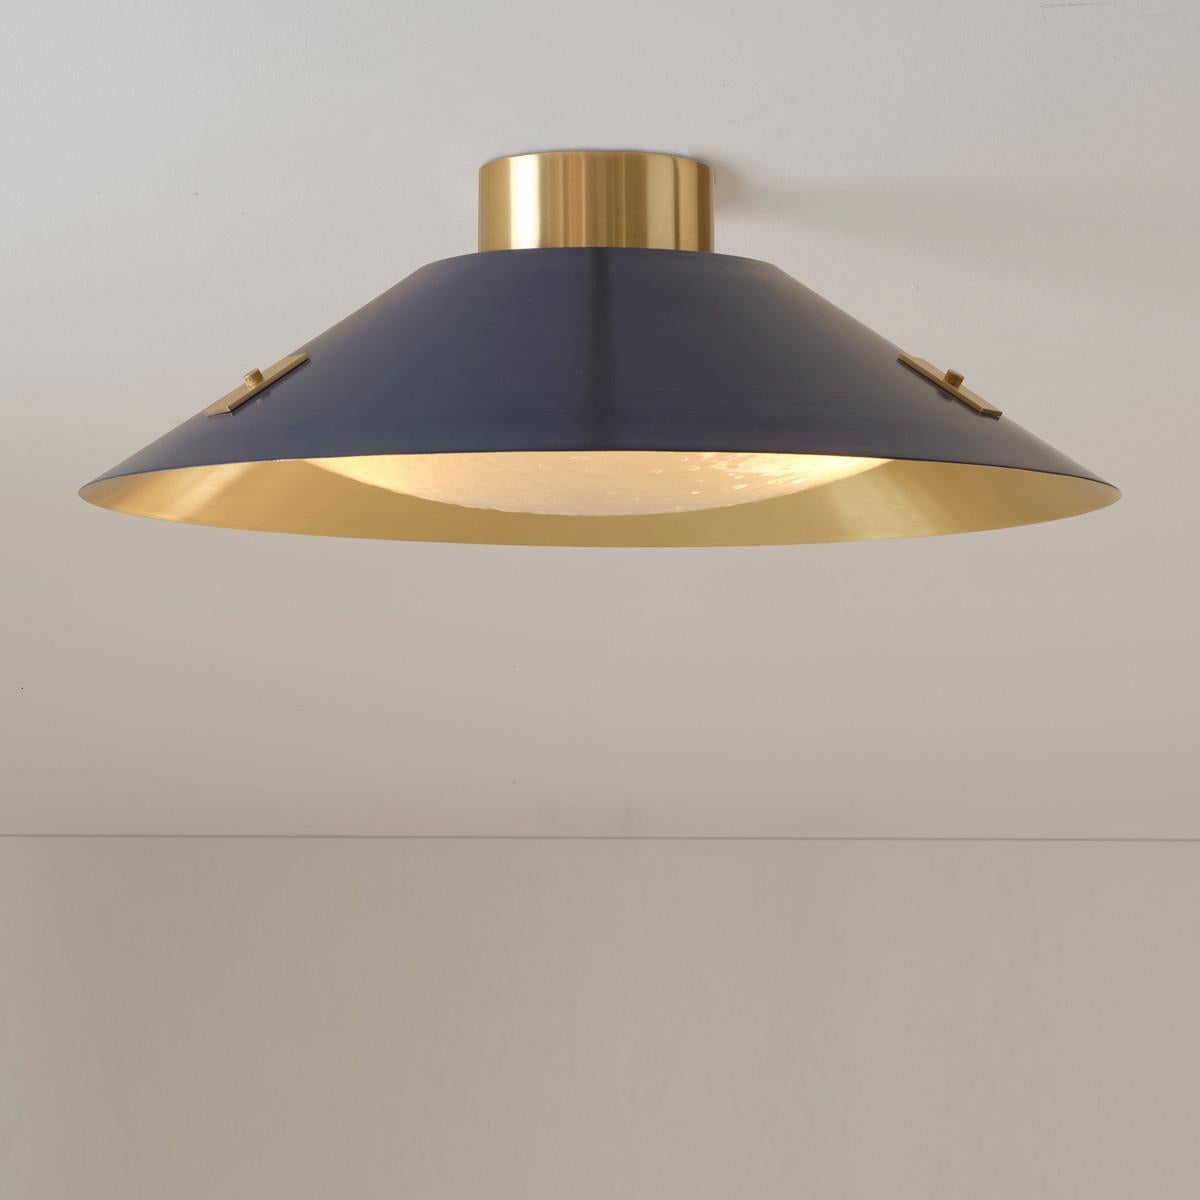 Kono Pendant by Gaspare Asaro. Satin Brass and Sand White For Sale 10